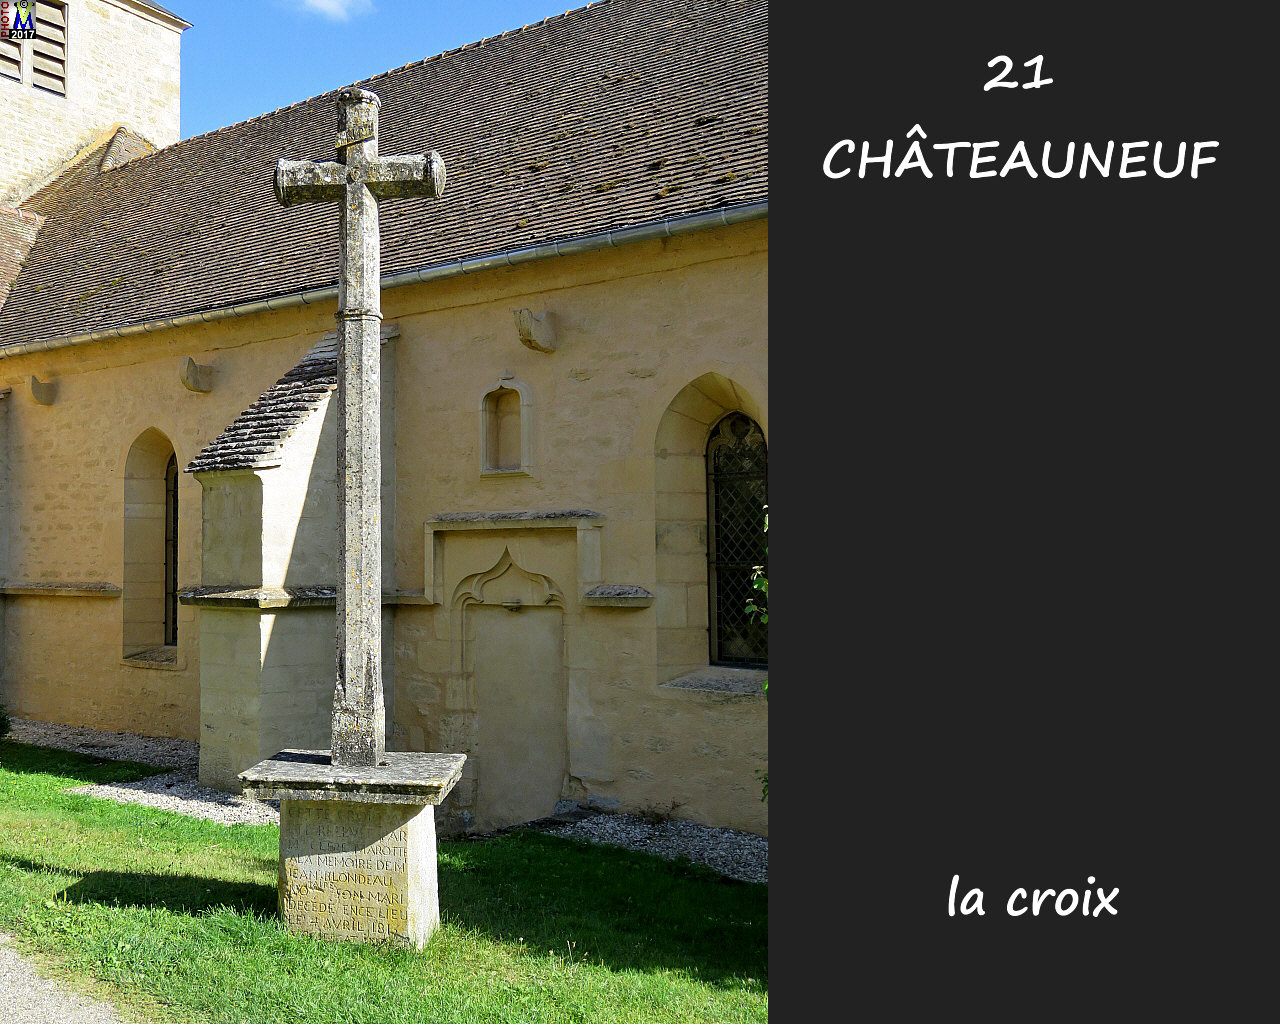 21CHATEAUNEUF_croix_100.jpg